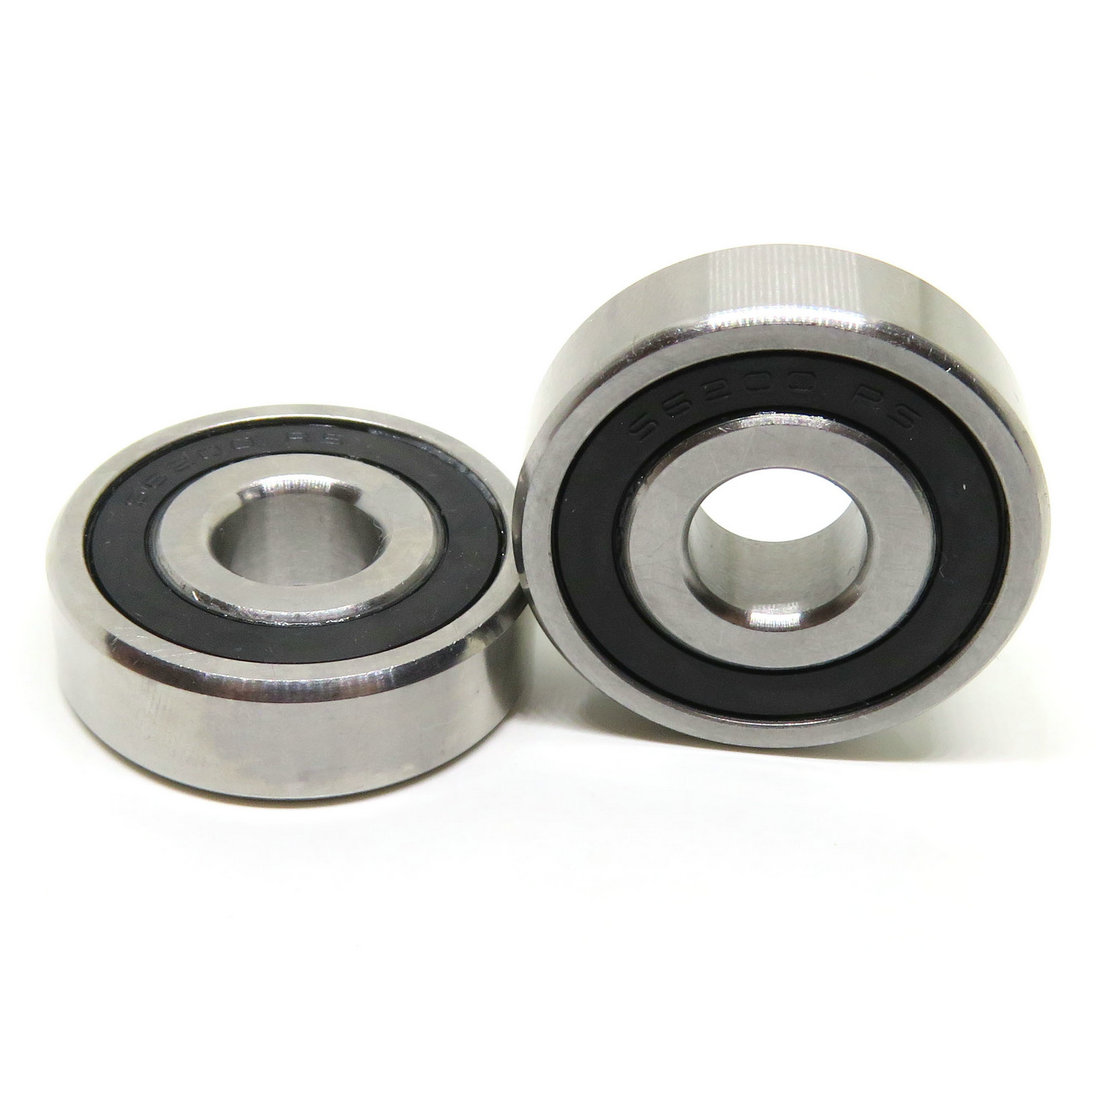 Light-duty Industrial Applications S6201-2RS Stainless Steel Bearing 12x32x10 Sealed Ball Bearings S6201RS.jpg